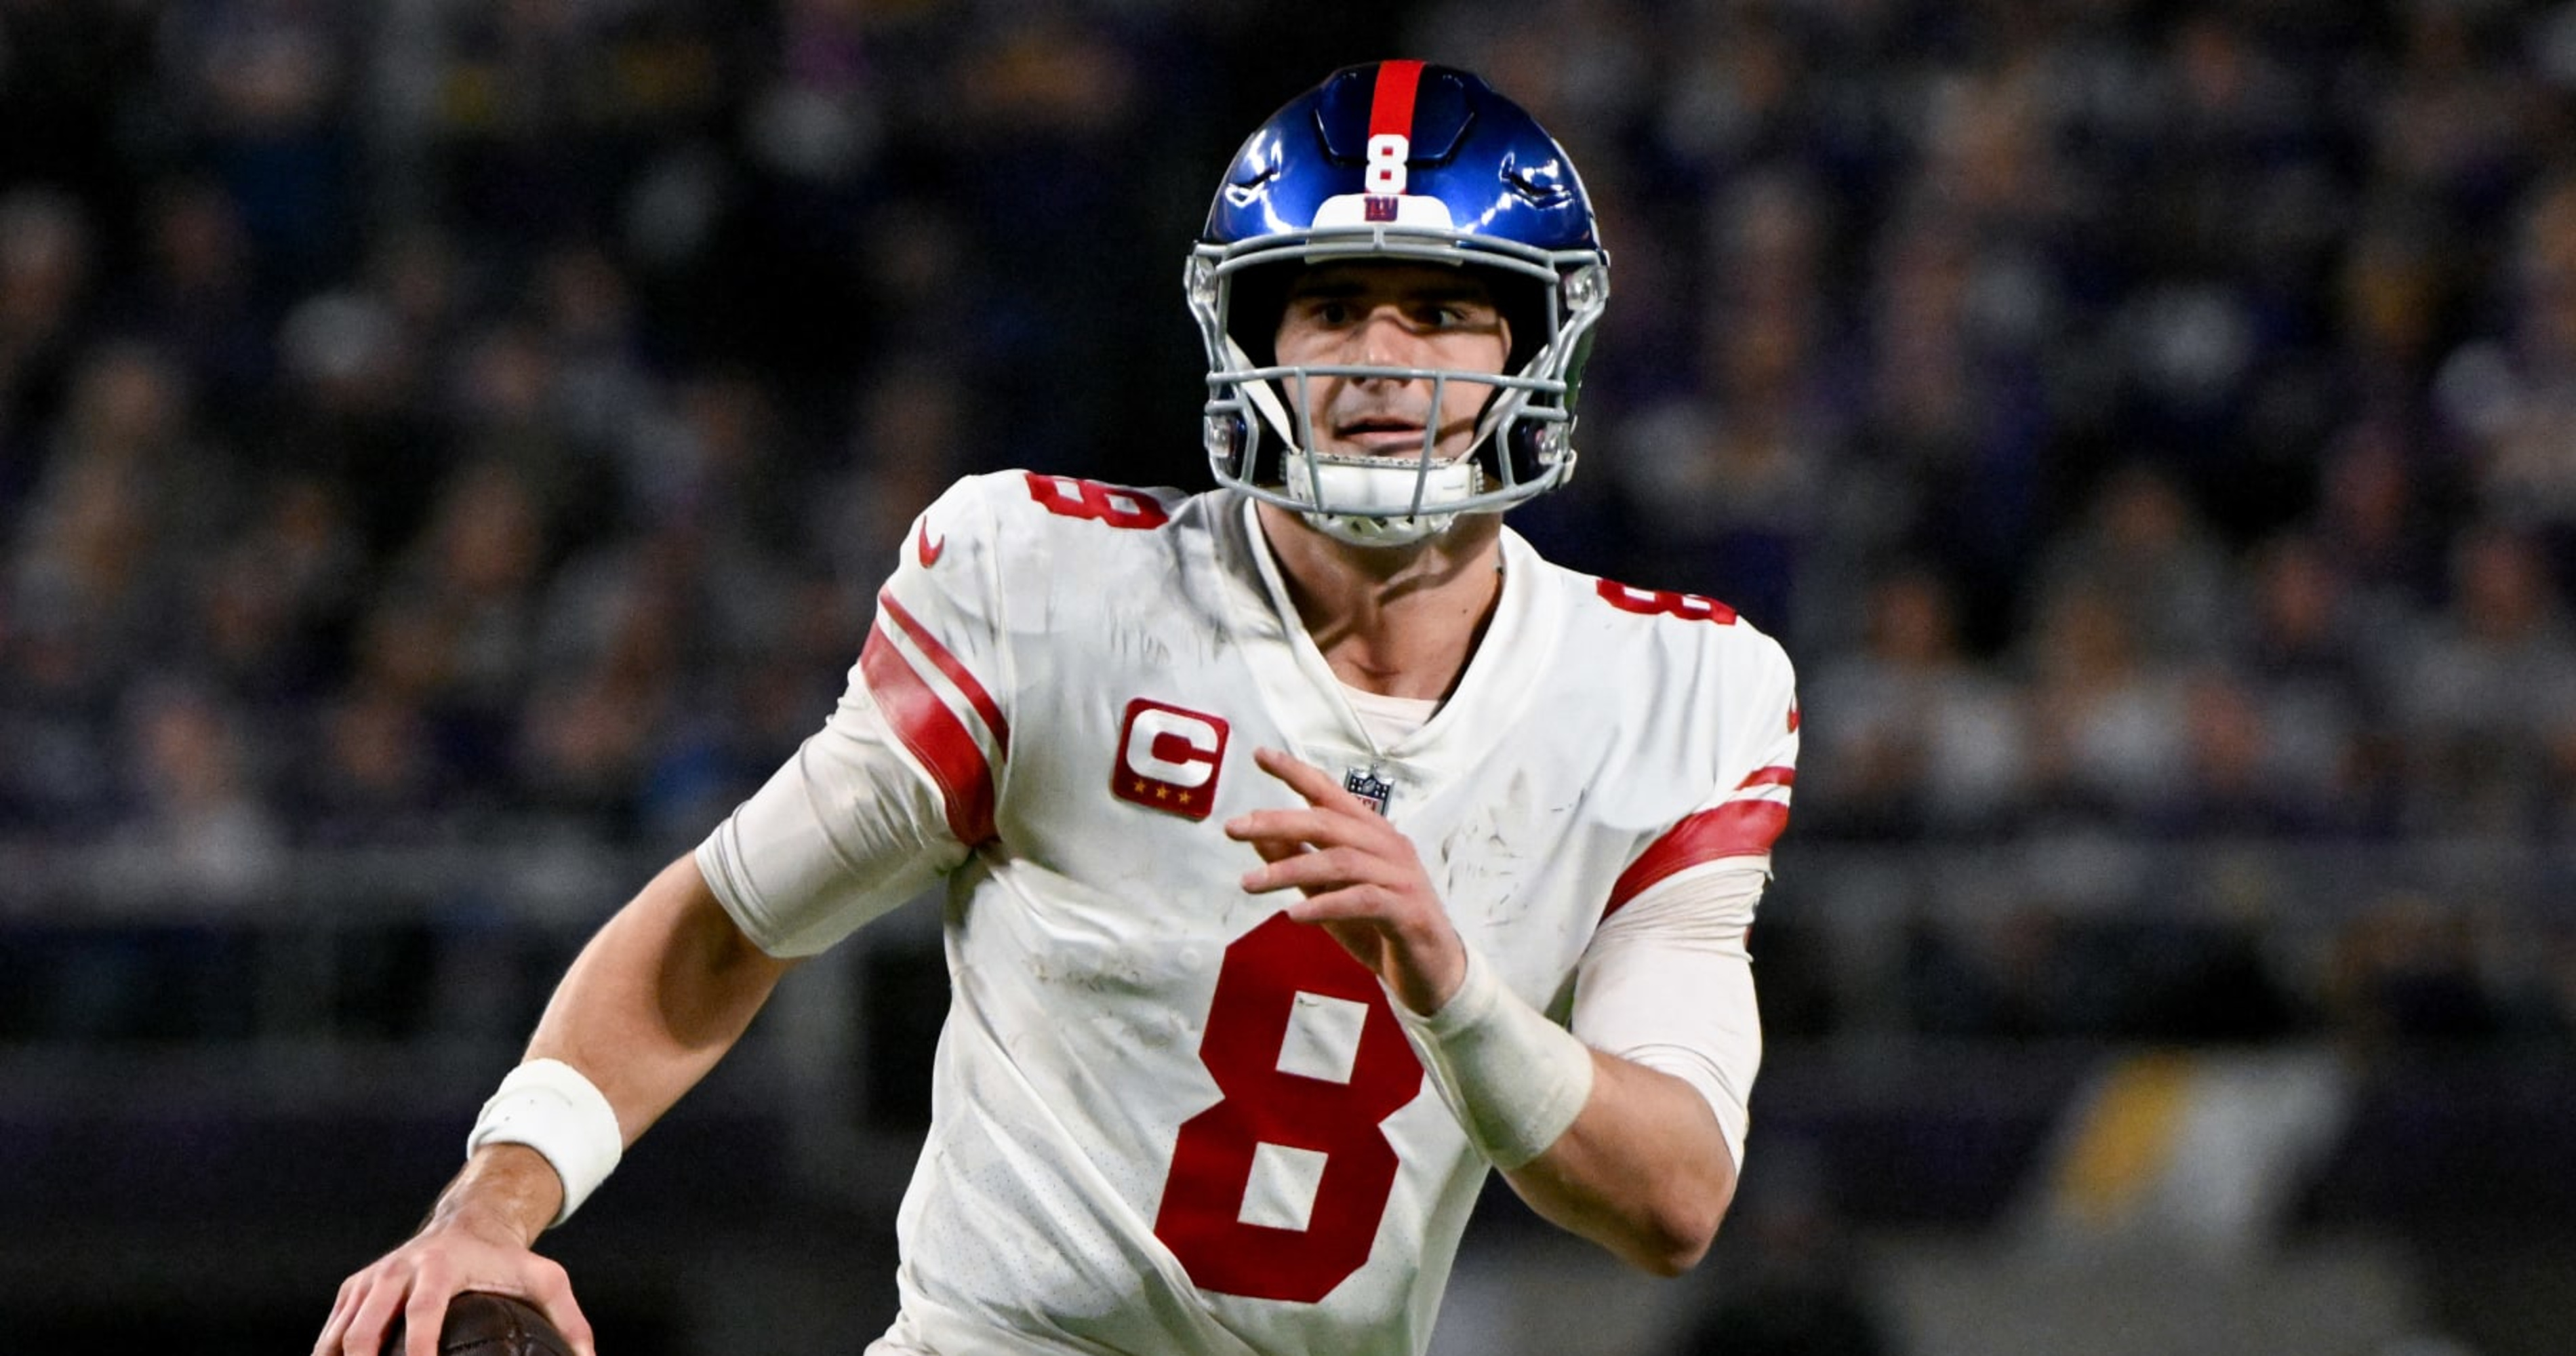 Eagles writer gives 3 reasons why the Giants will win the